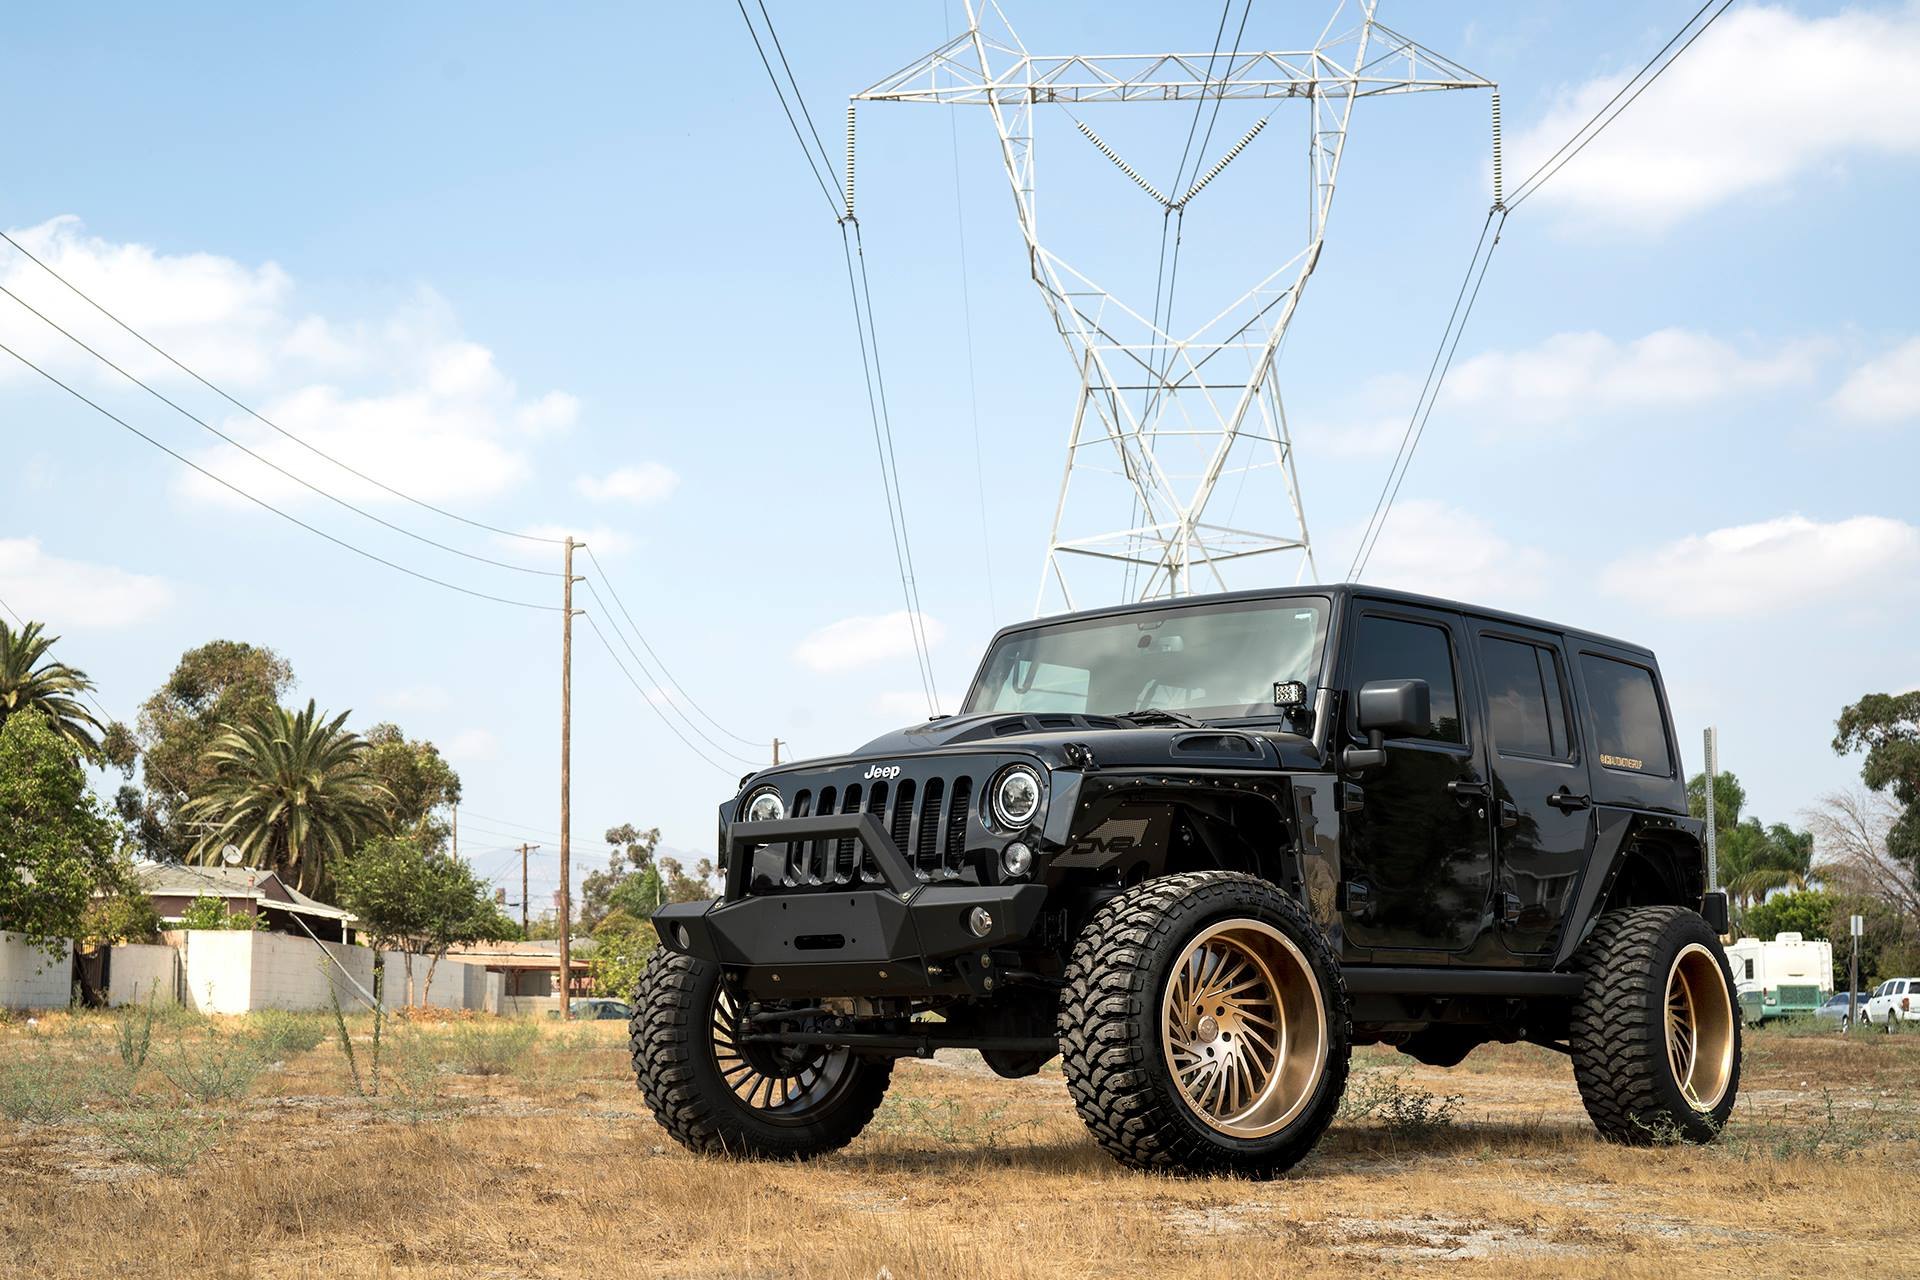 Mysterious Appearance of Lifted Jeep Wrangler Put on Bronze Forgiato Wheels  —  Gallery